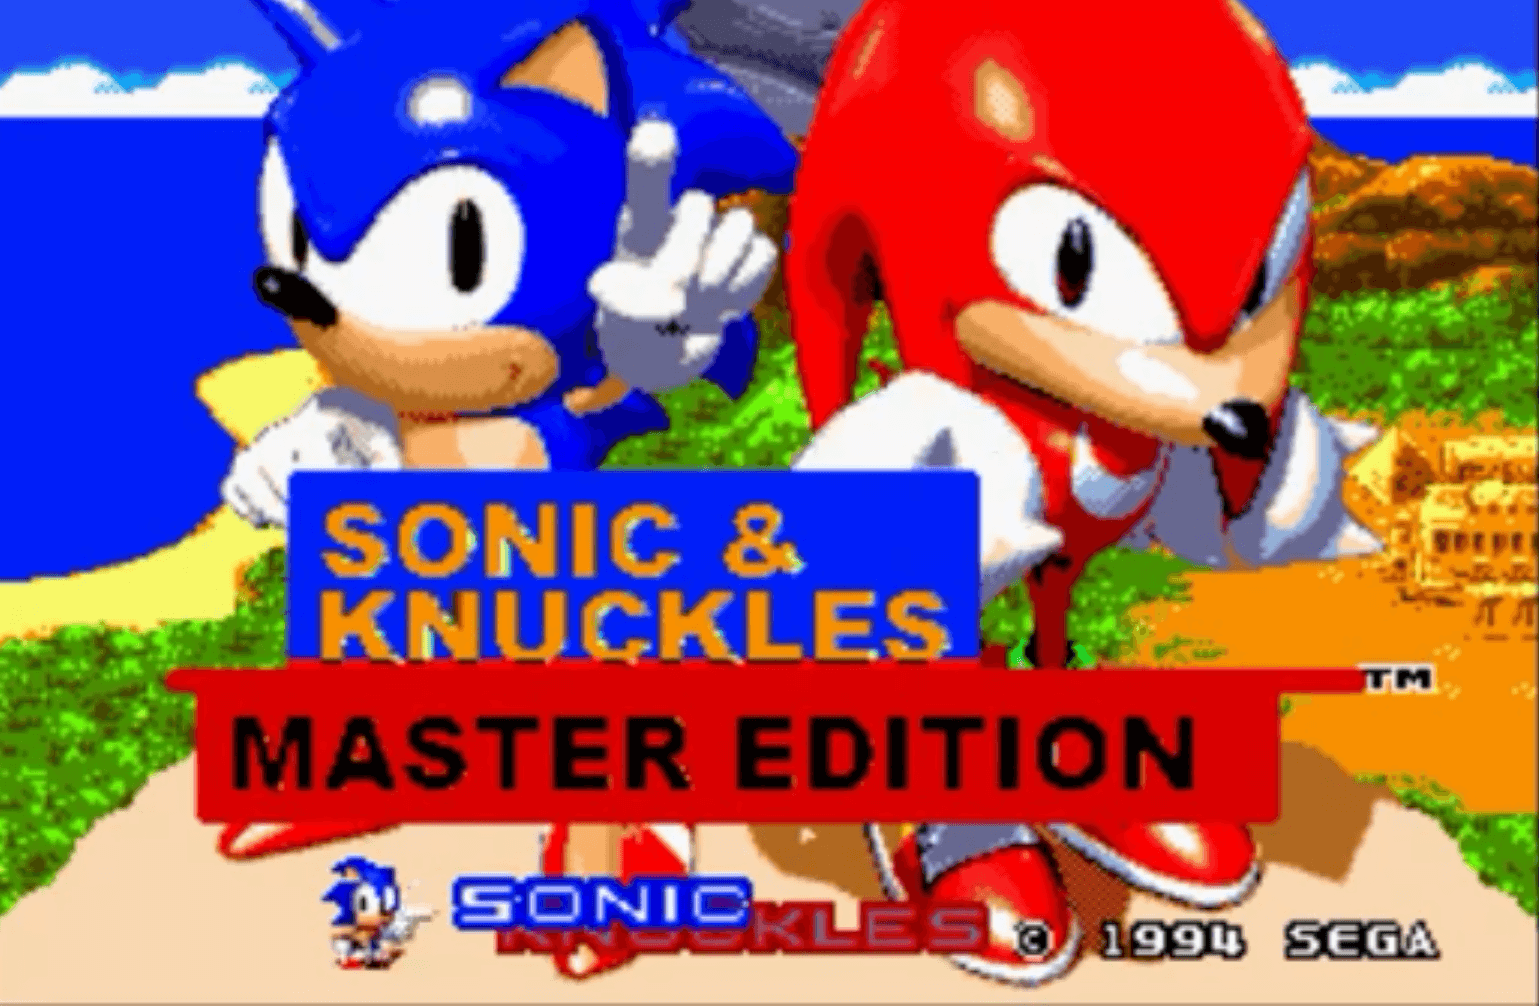 sonic-hacking-contest-the-shc2020-expo-sonic-knuckles-master-edition-demo-by-xebninmaj